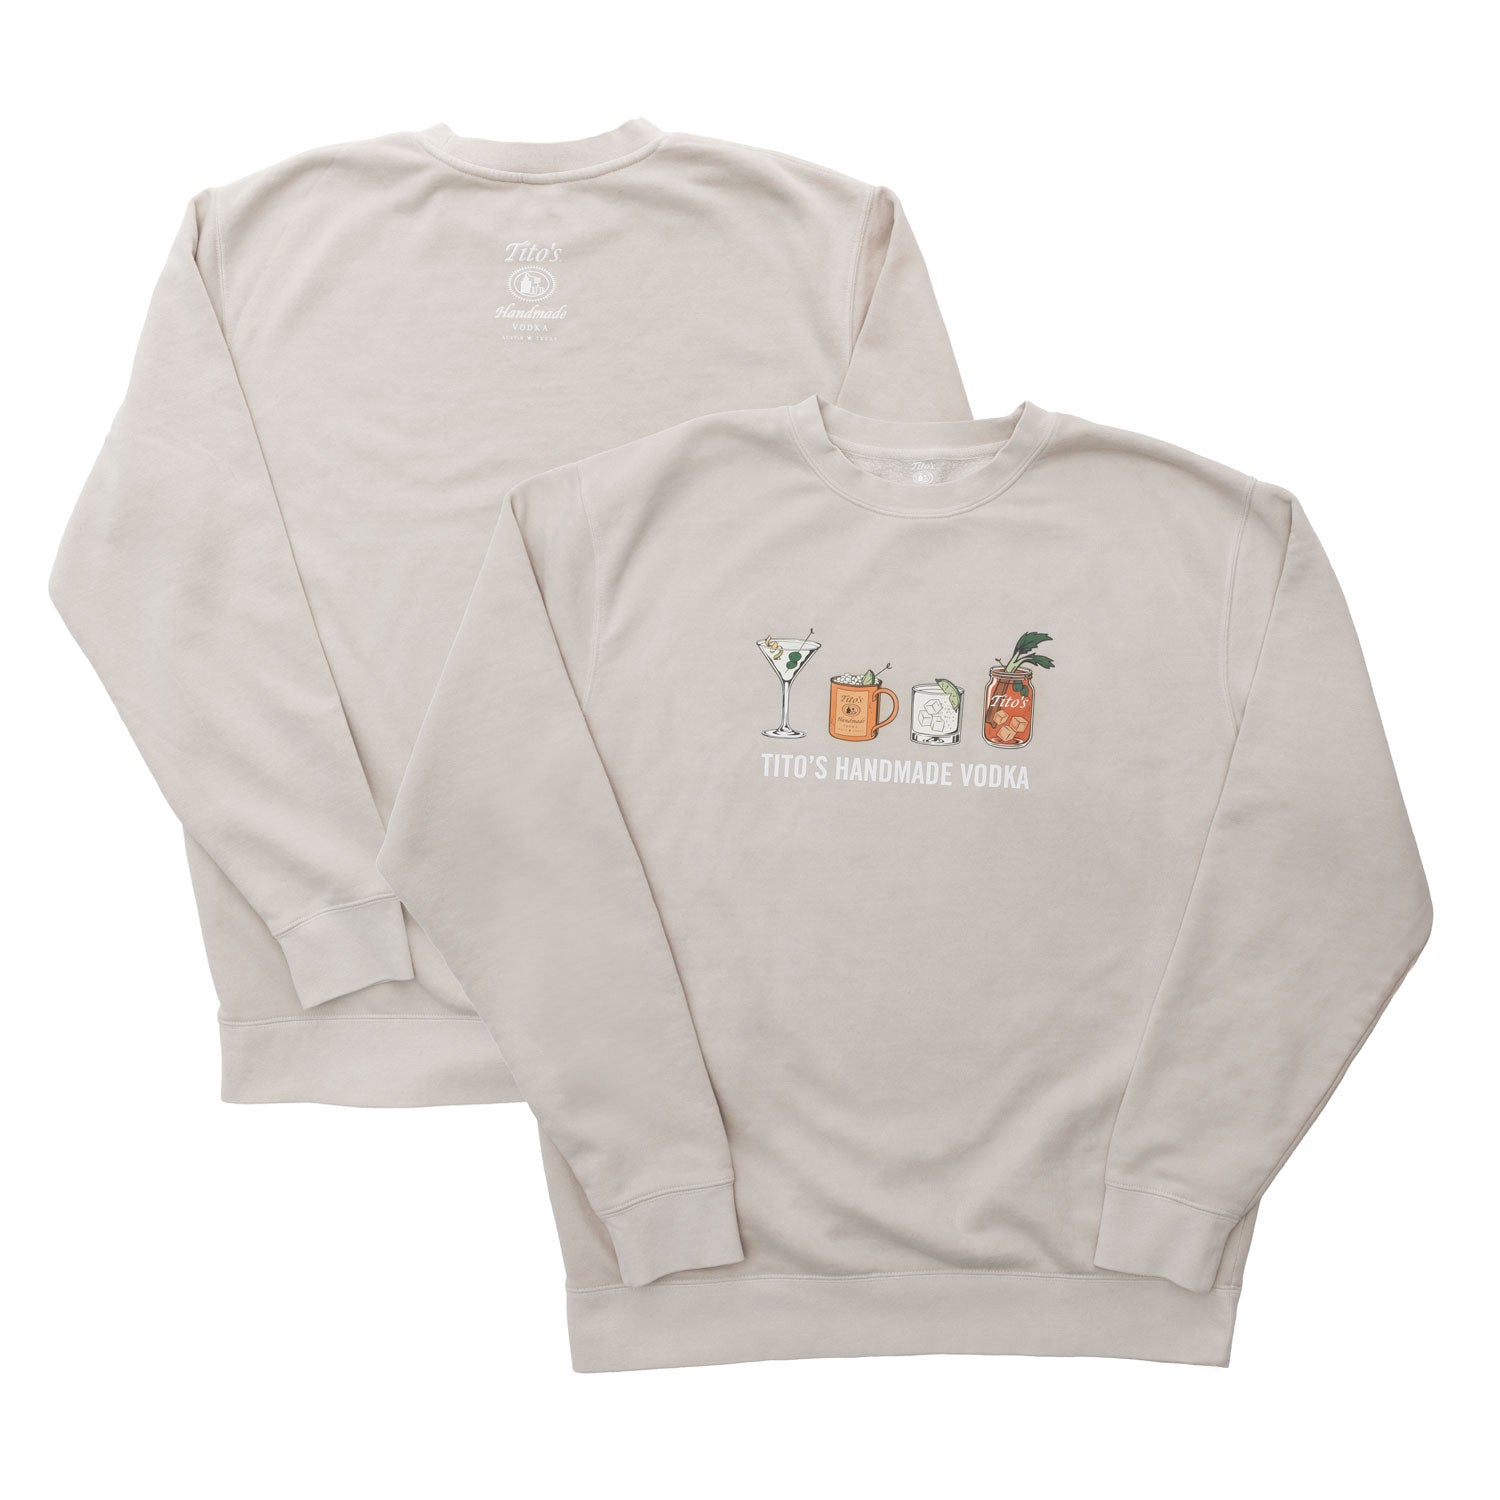 Natural color crewneck sweatshirt with illustrations of a martini, mule, Tito's soda lime, bloody mary, and Tito's Handmade Vodka text on front and Tito's logo on back